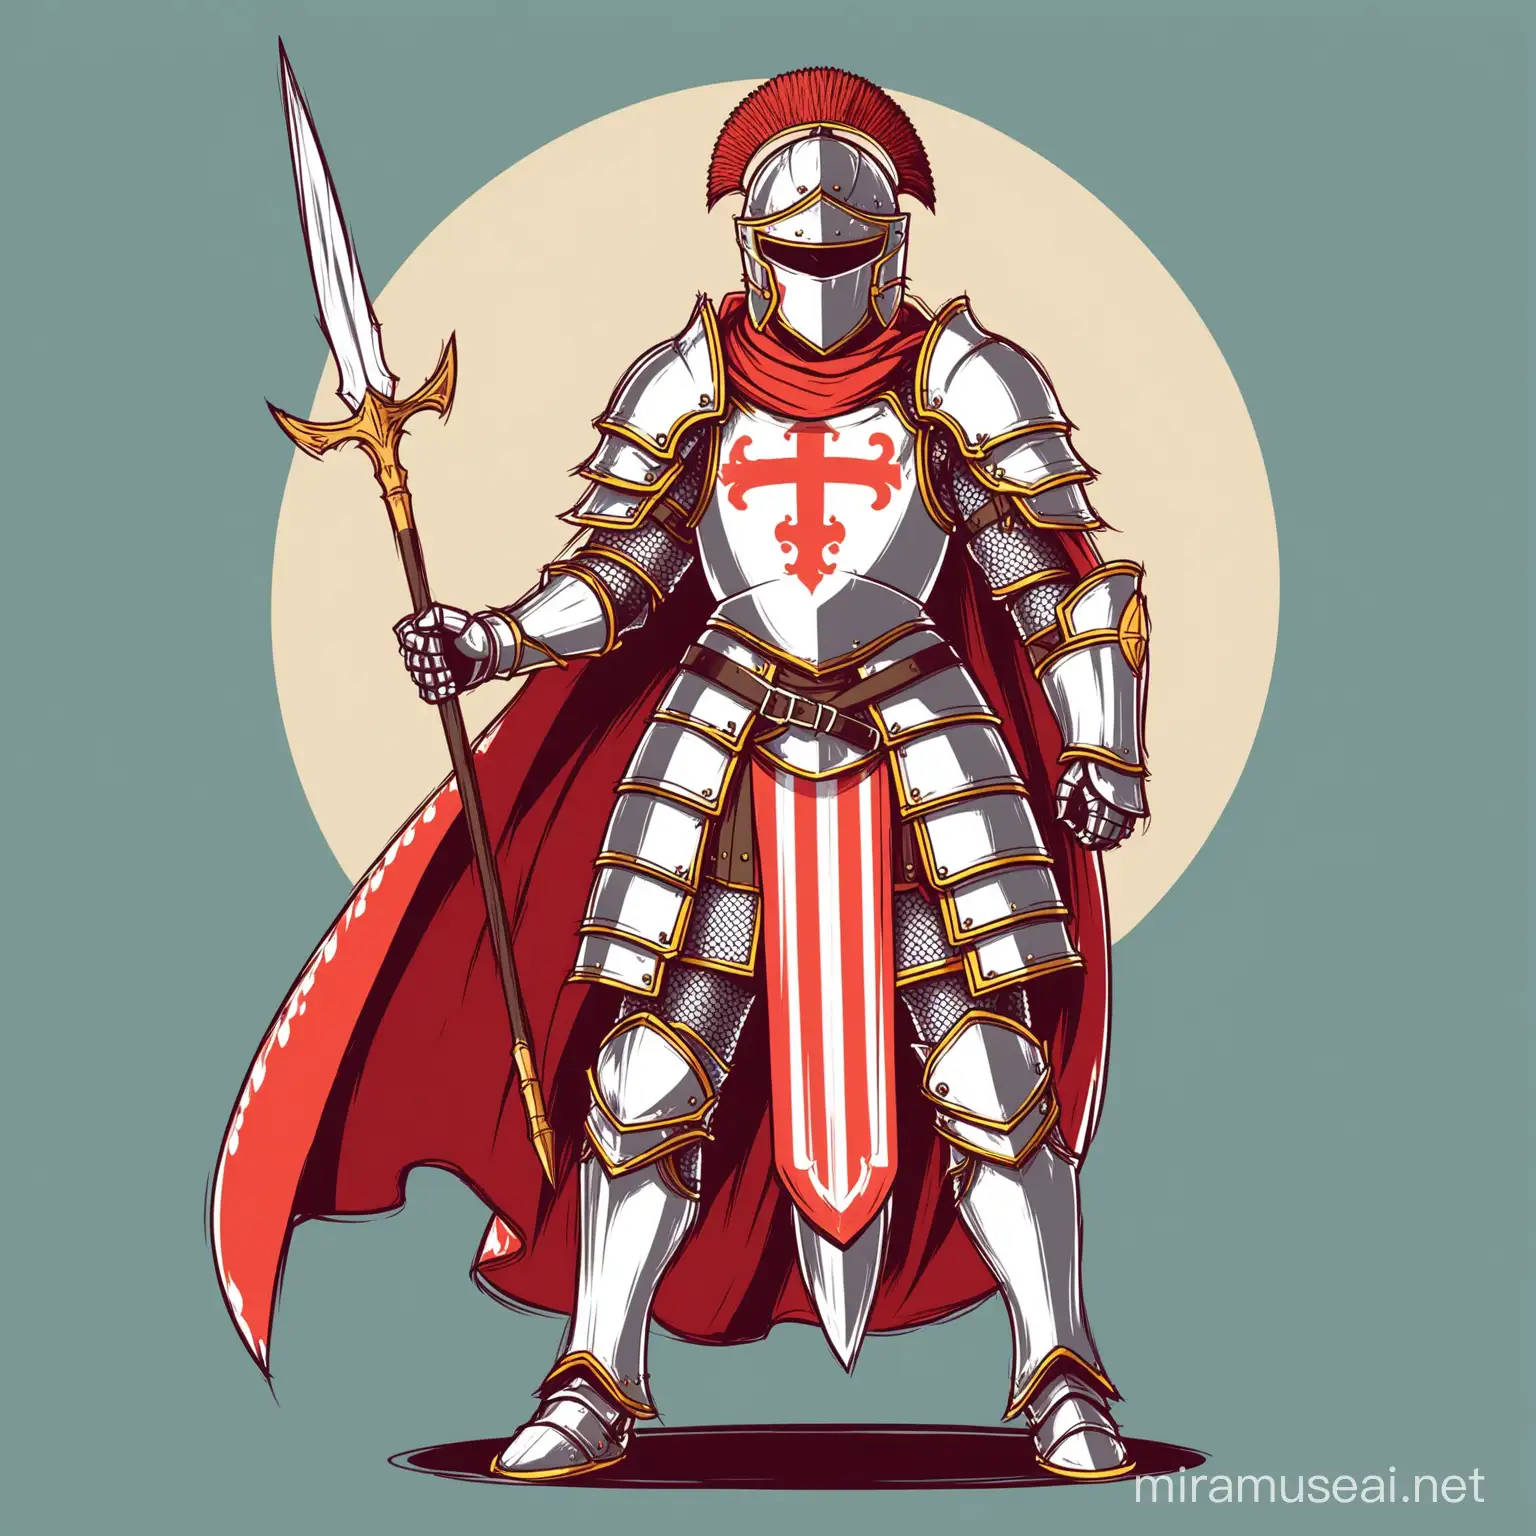 MALE WARRIOR CHARACTER, ARMOR OF SAINT GEORGE, WITH SPEAR, HELMET. VECTOR